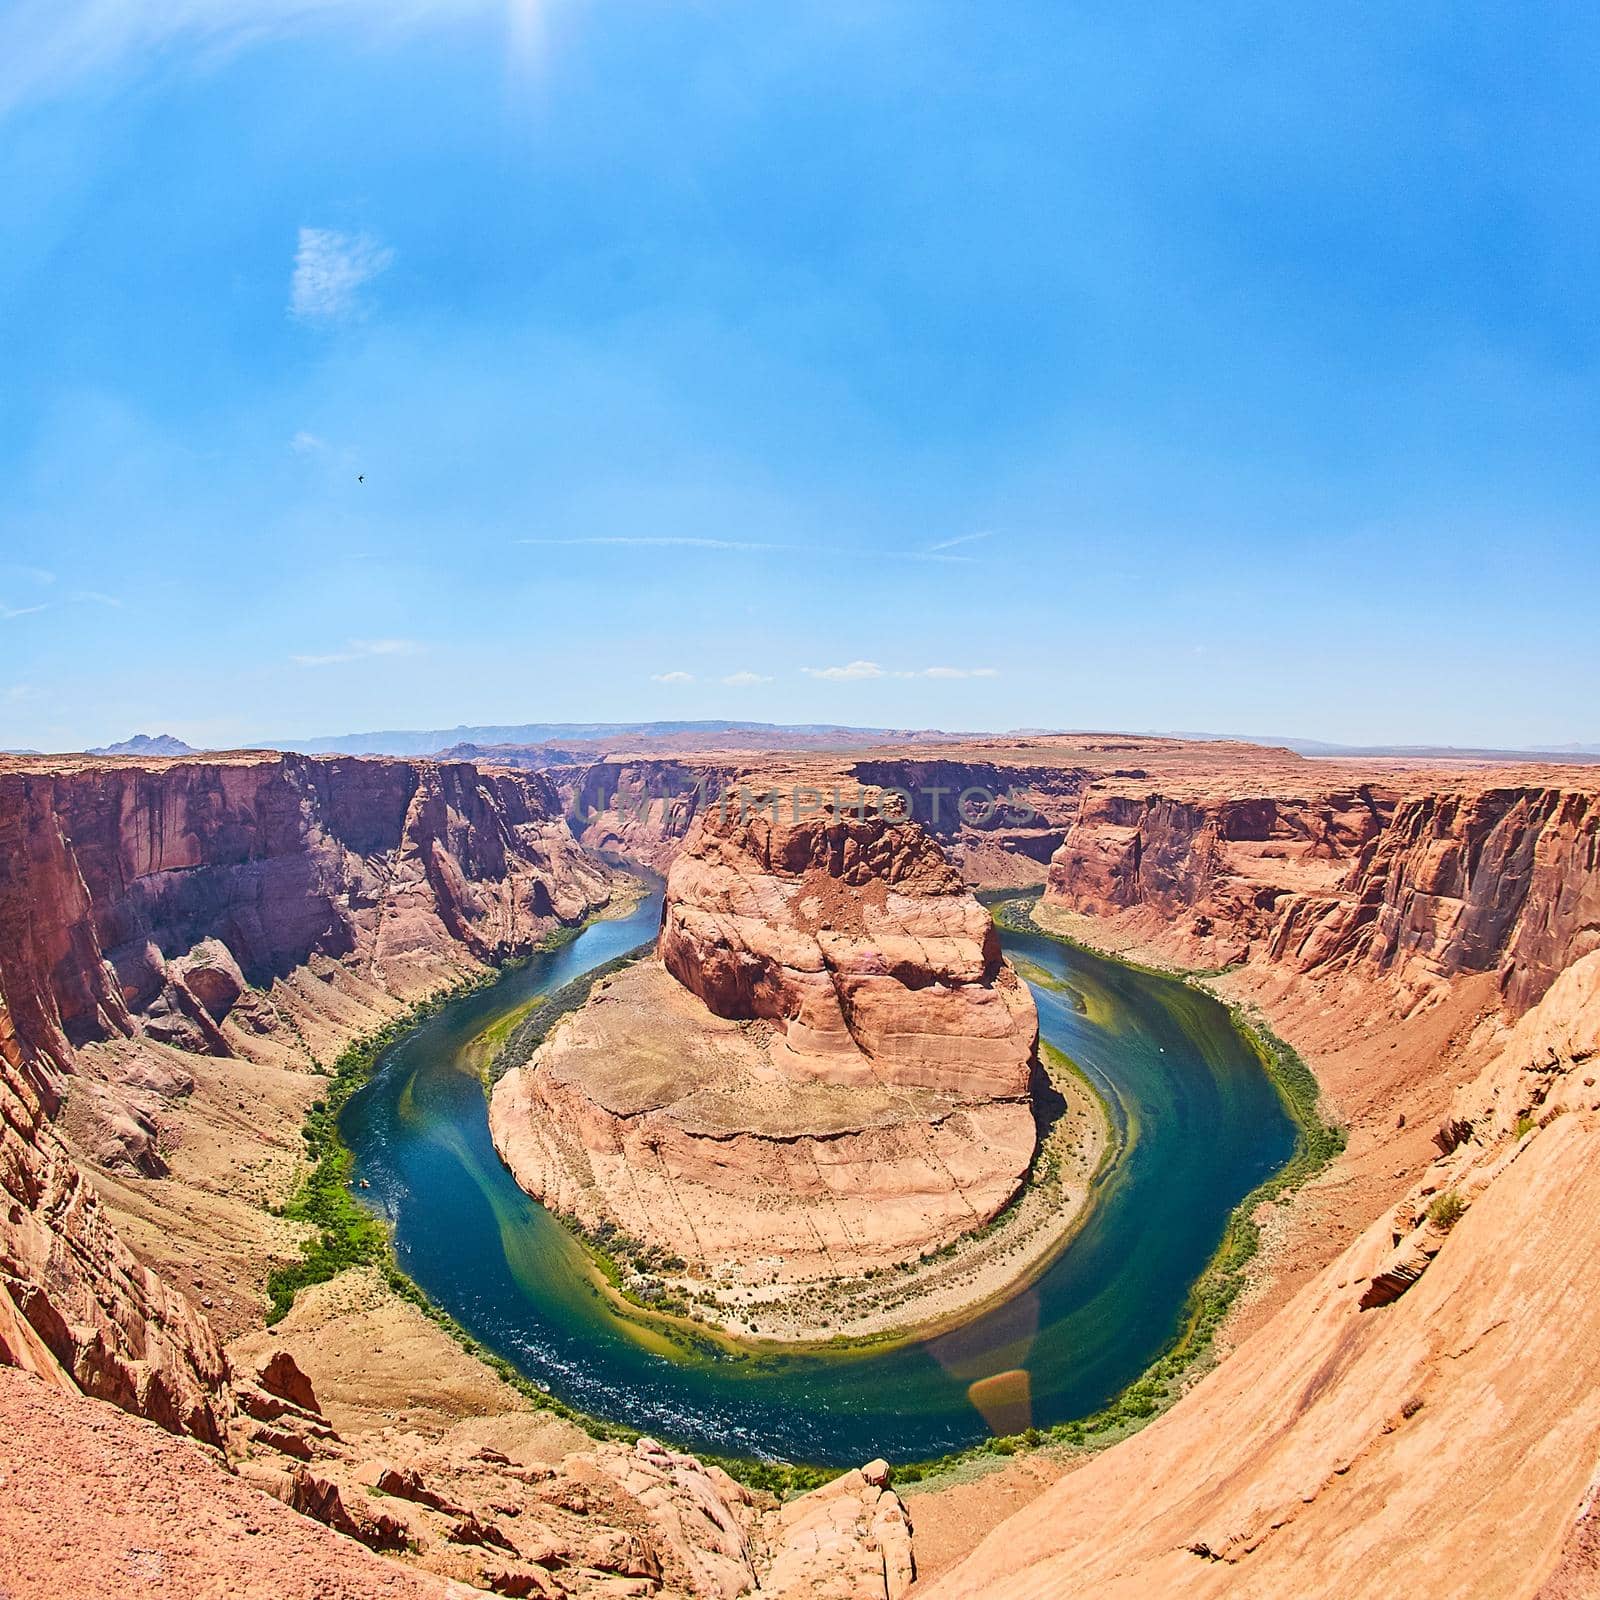 Aerial shot of a canyon surrounding a large river or pond shaped around a rocky outcropping Horseshoe Bend by njproductions